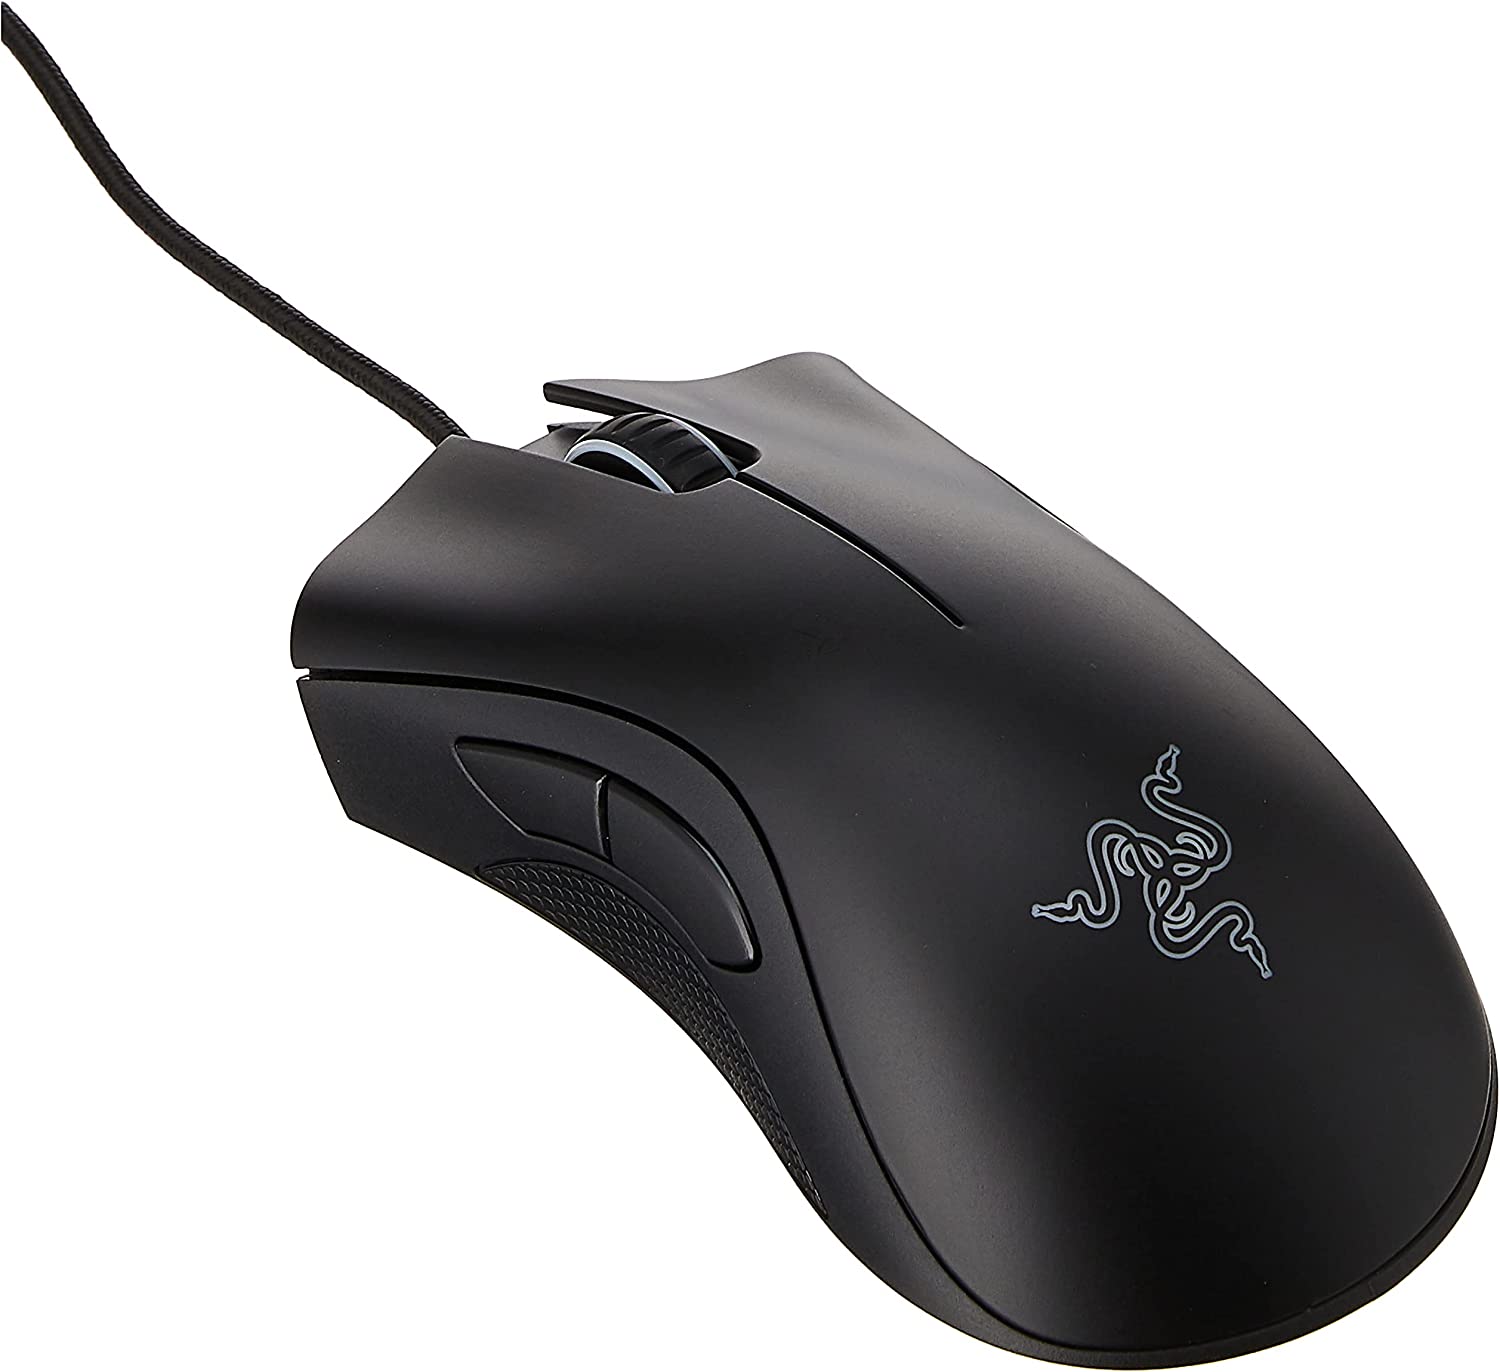 Razer DeathAdder Essential 6400 DPI Optical Gaming Mouse (White or Black) $20 + Free Shipping w/ Prime or on orders over $25